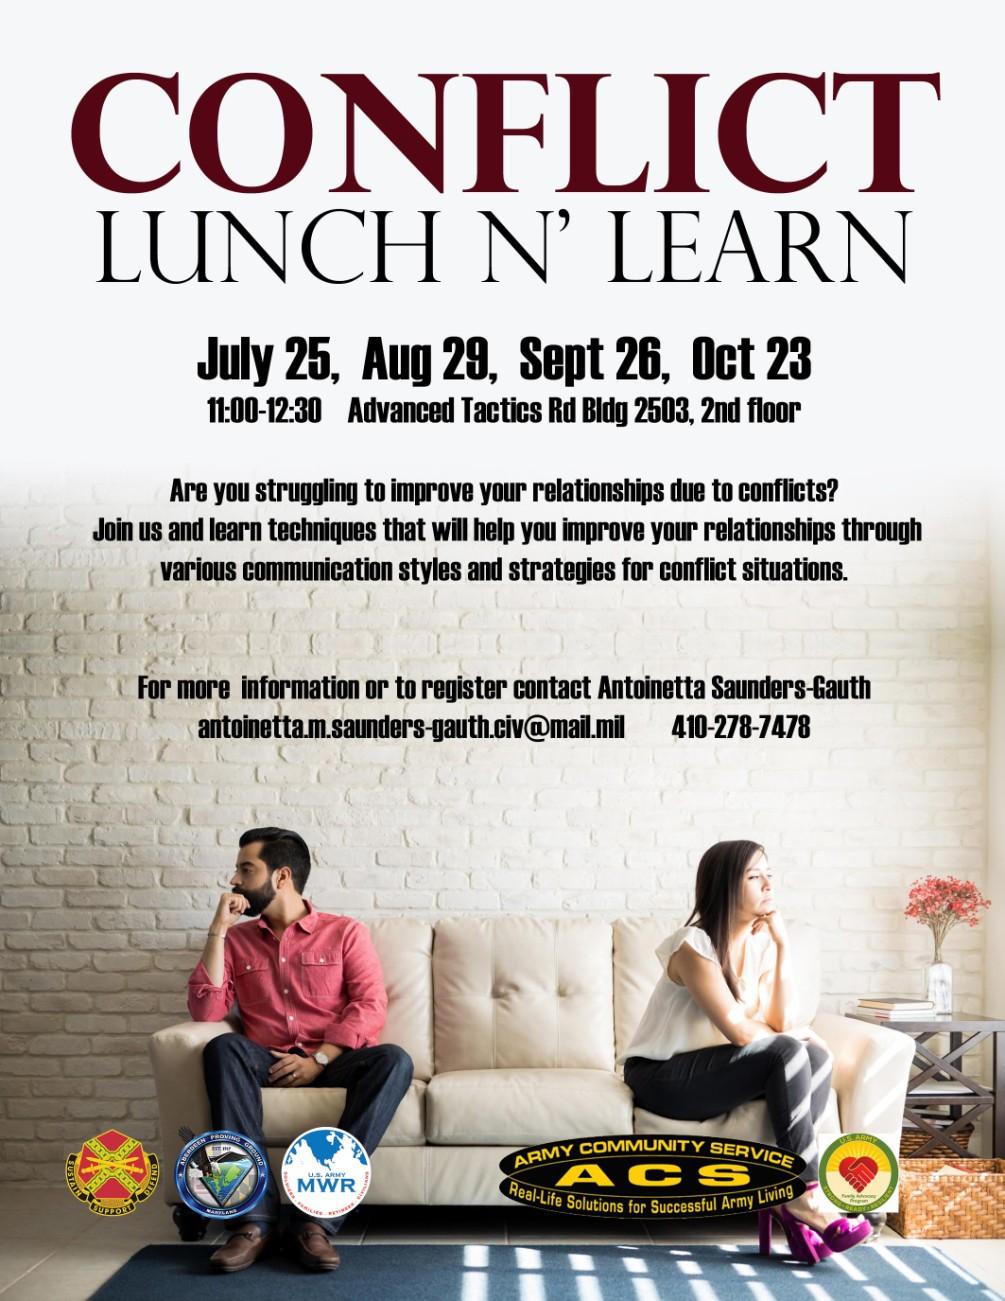 To reserve your seat for this FREE class, please contact: Michael Farlow, at 410-278-2435 or michael.b.farlow.civ@mail.